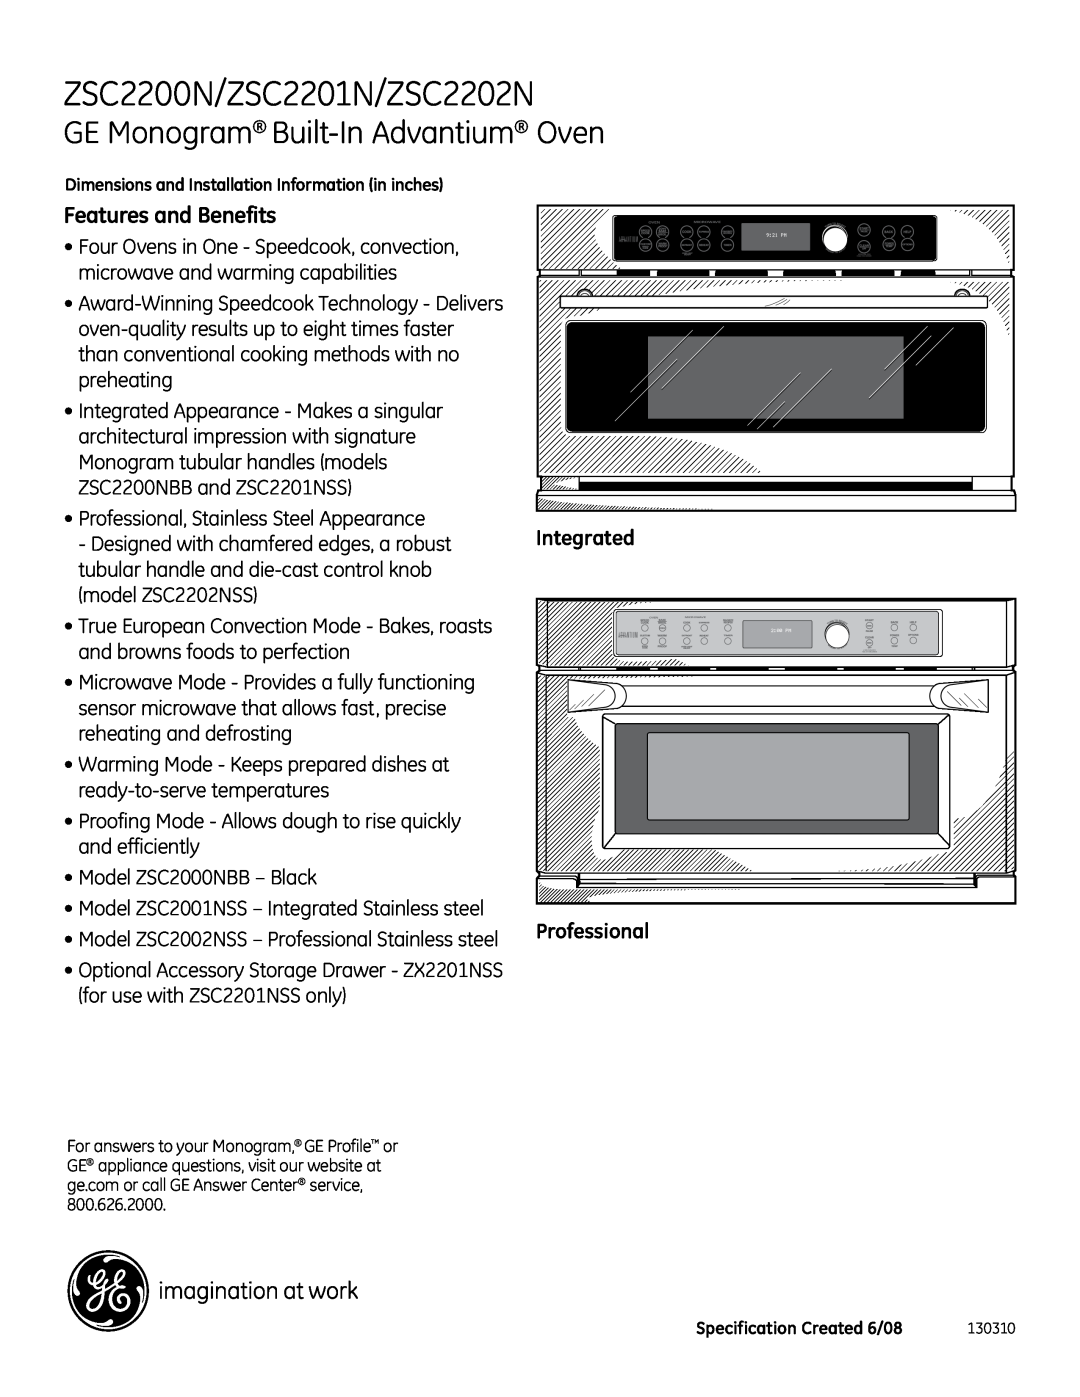 GE ZSC2200N/ZSC2201N/ZSC2202N, GE Monogram Built-In Advantium Oven, Features and Benefits, Integrated, Professional 